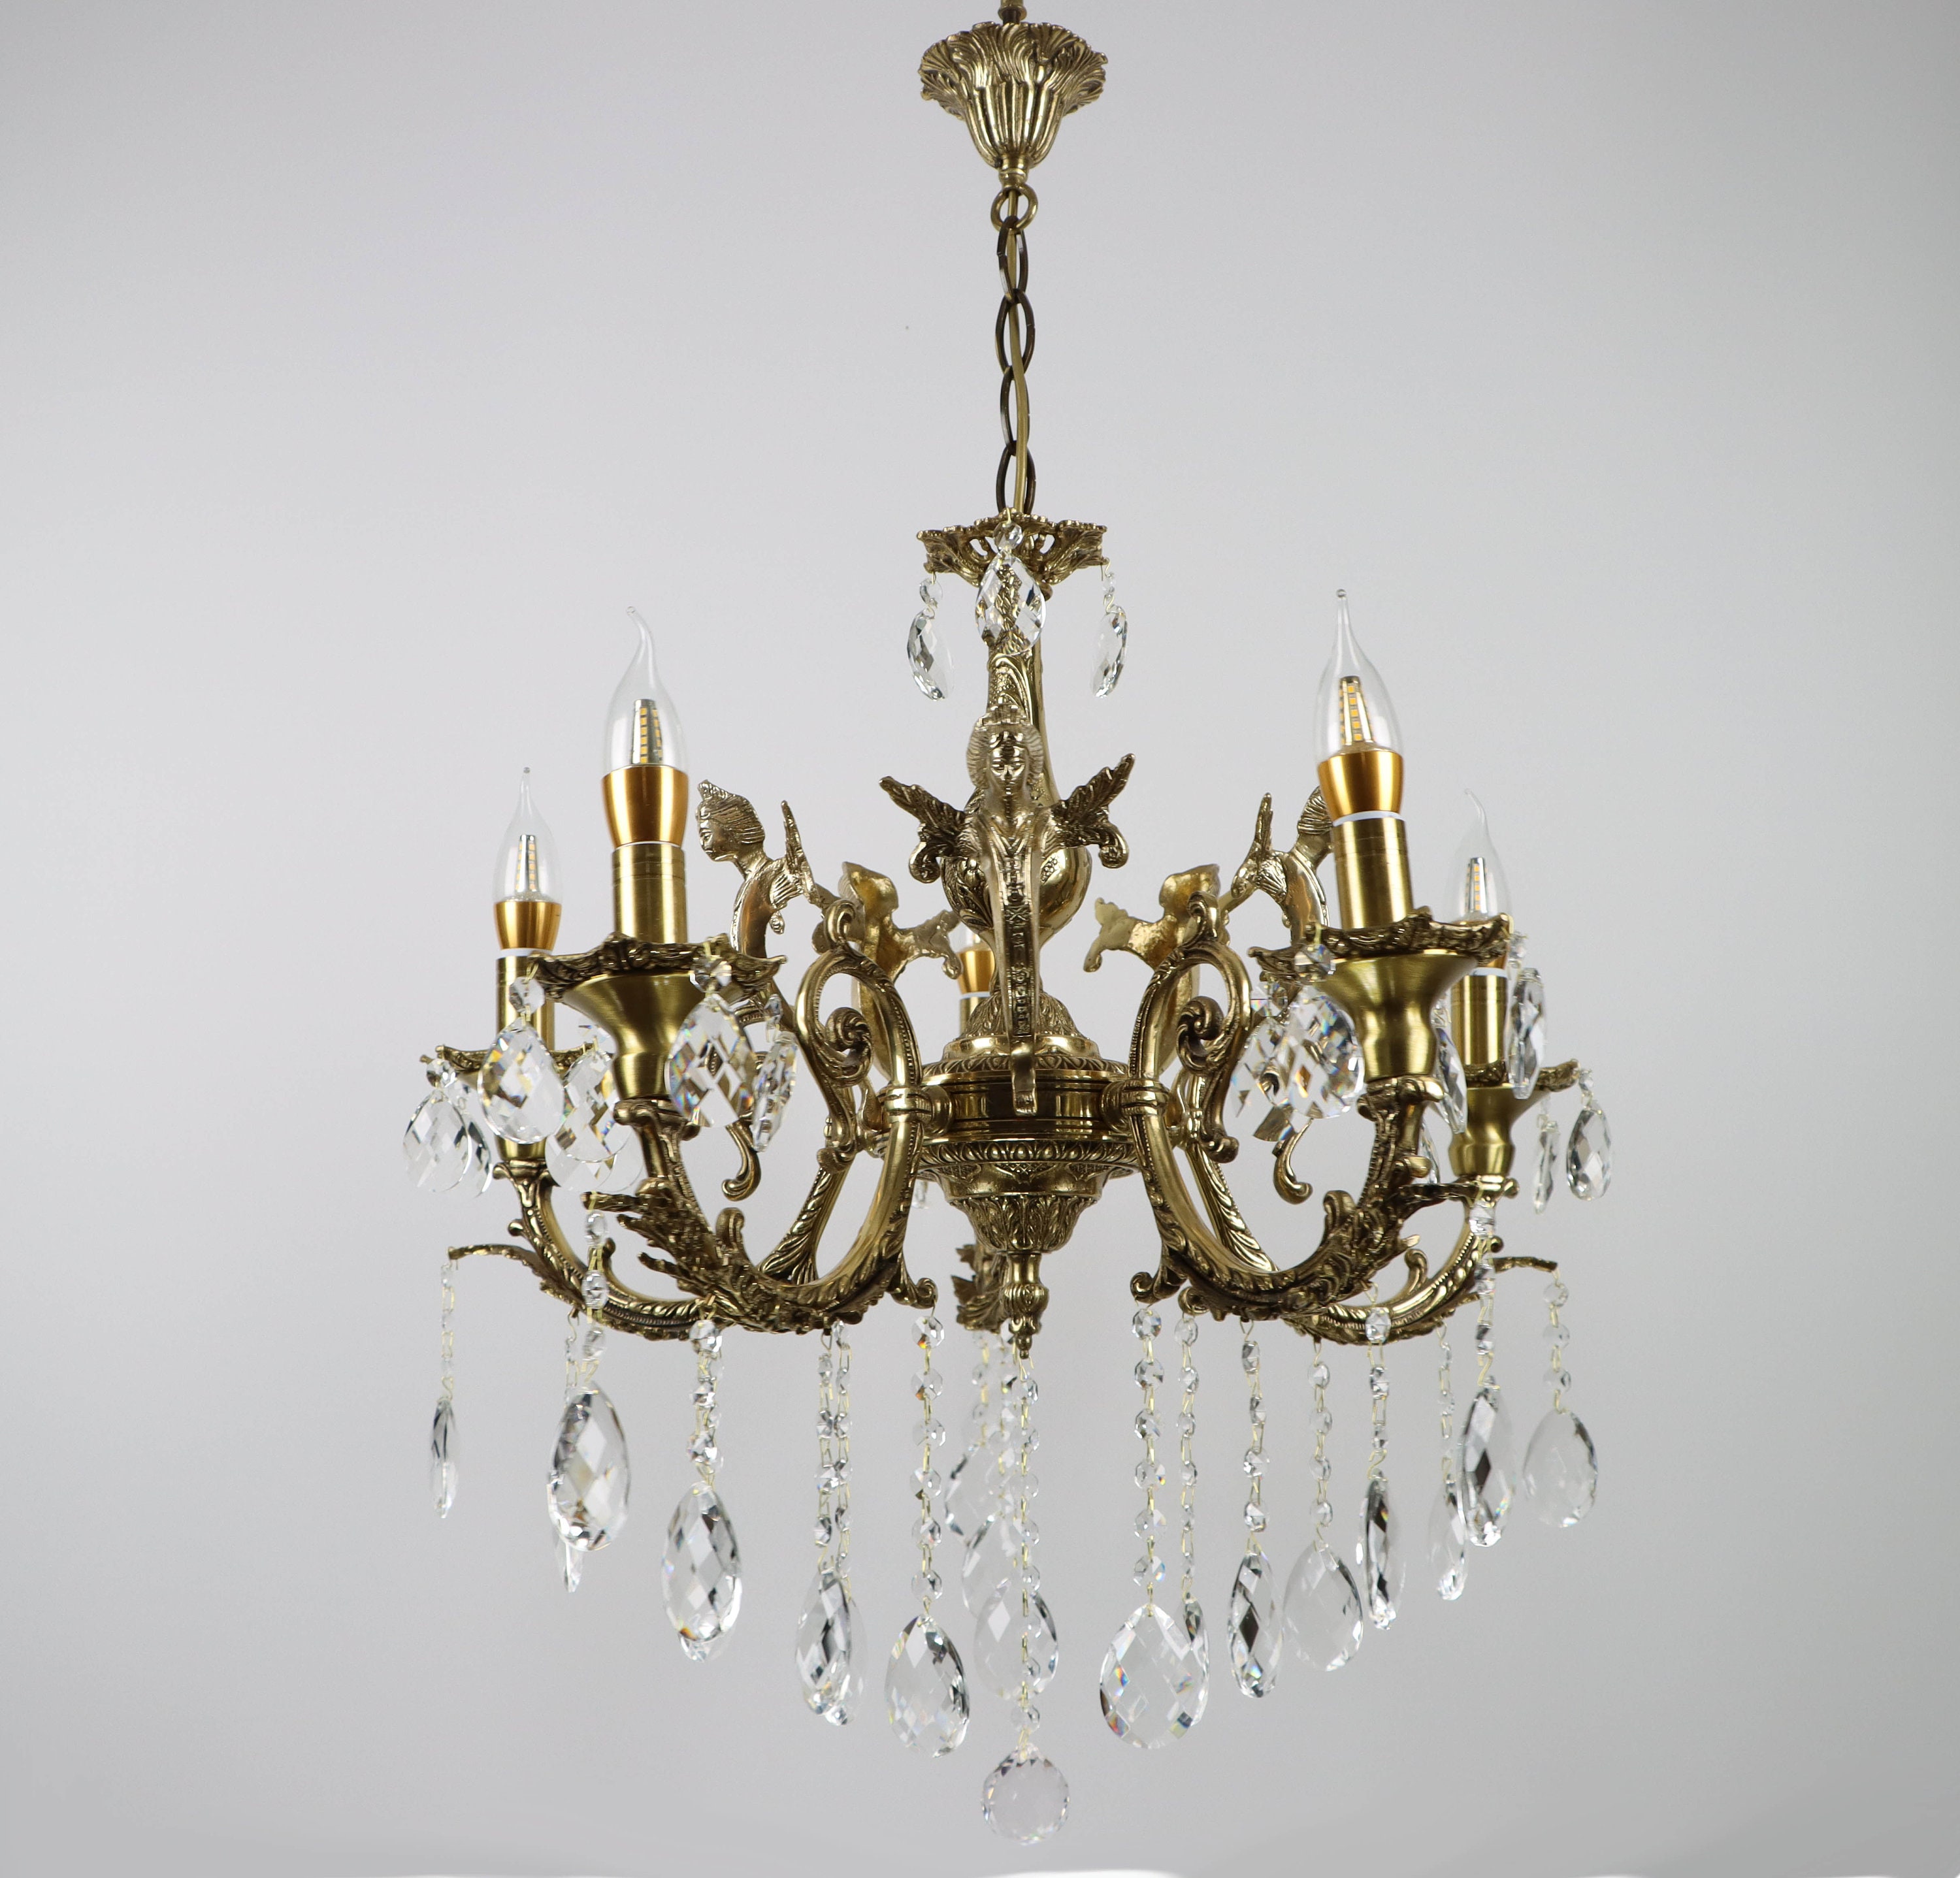 Bling Small Chandelier Antique Brass